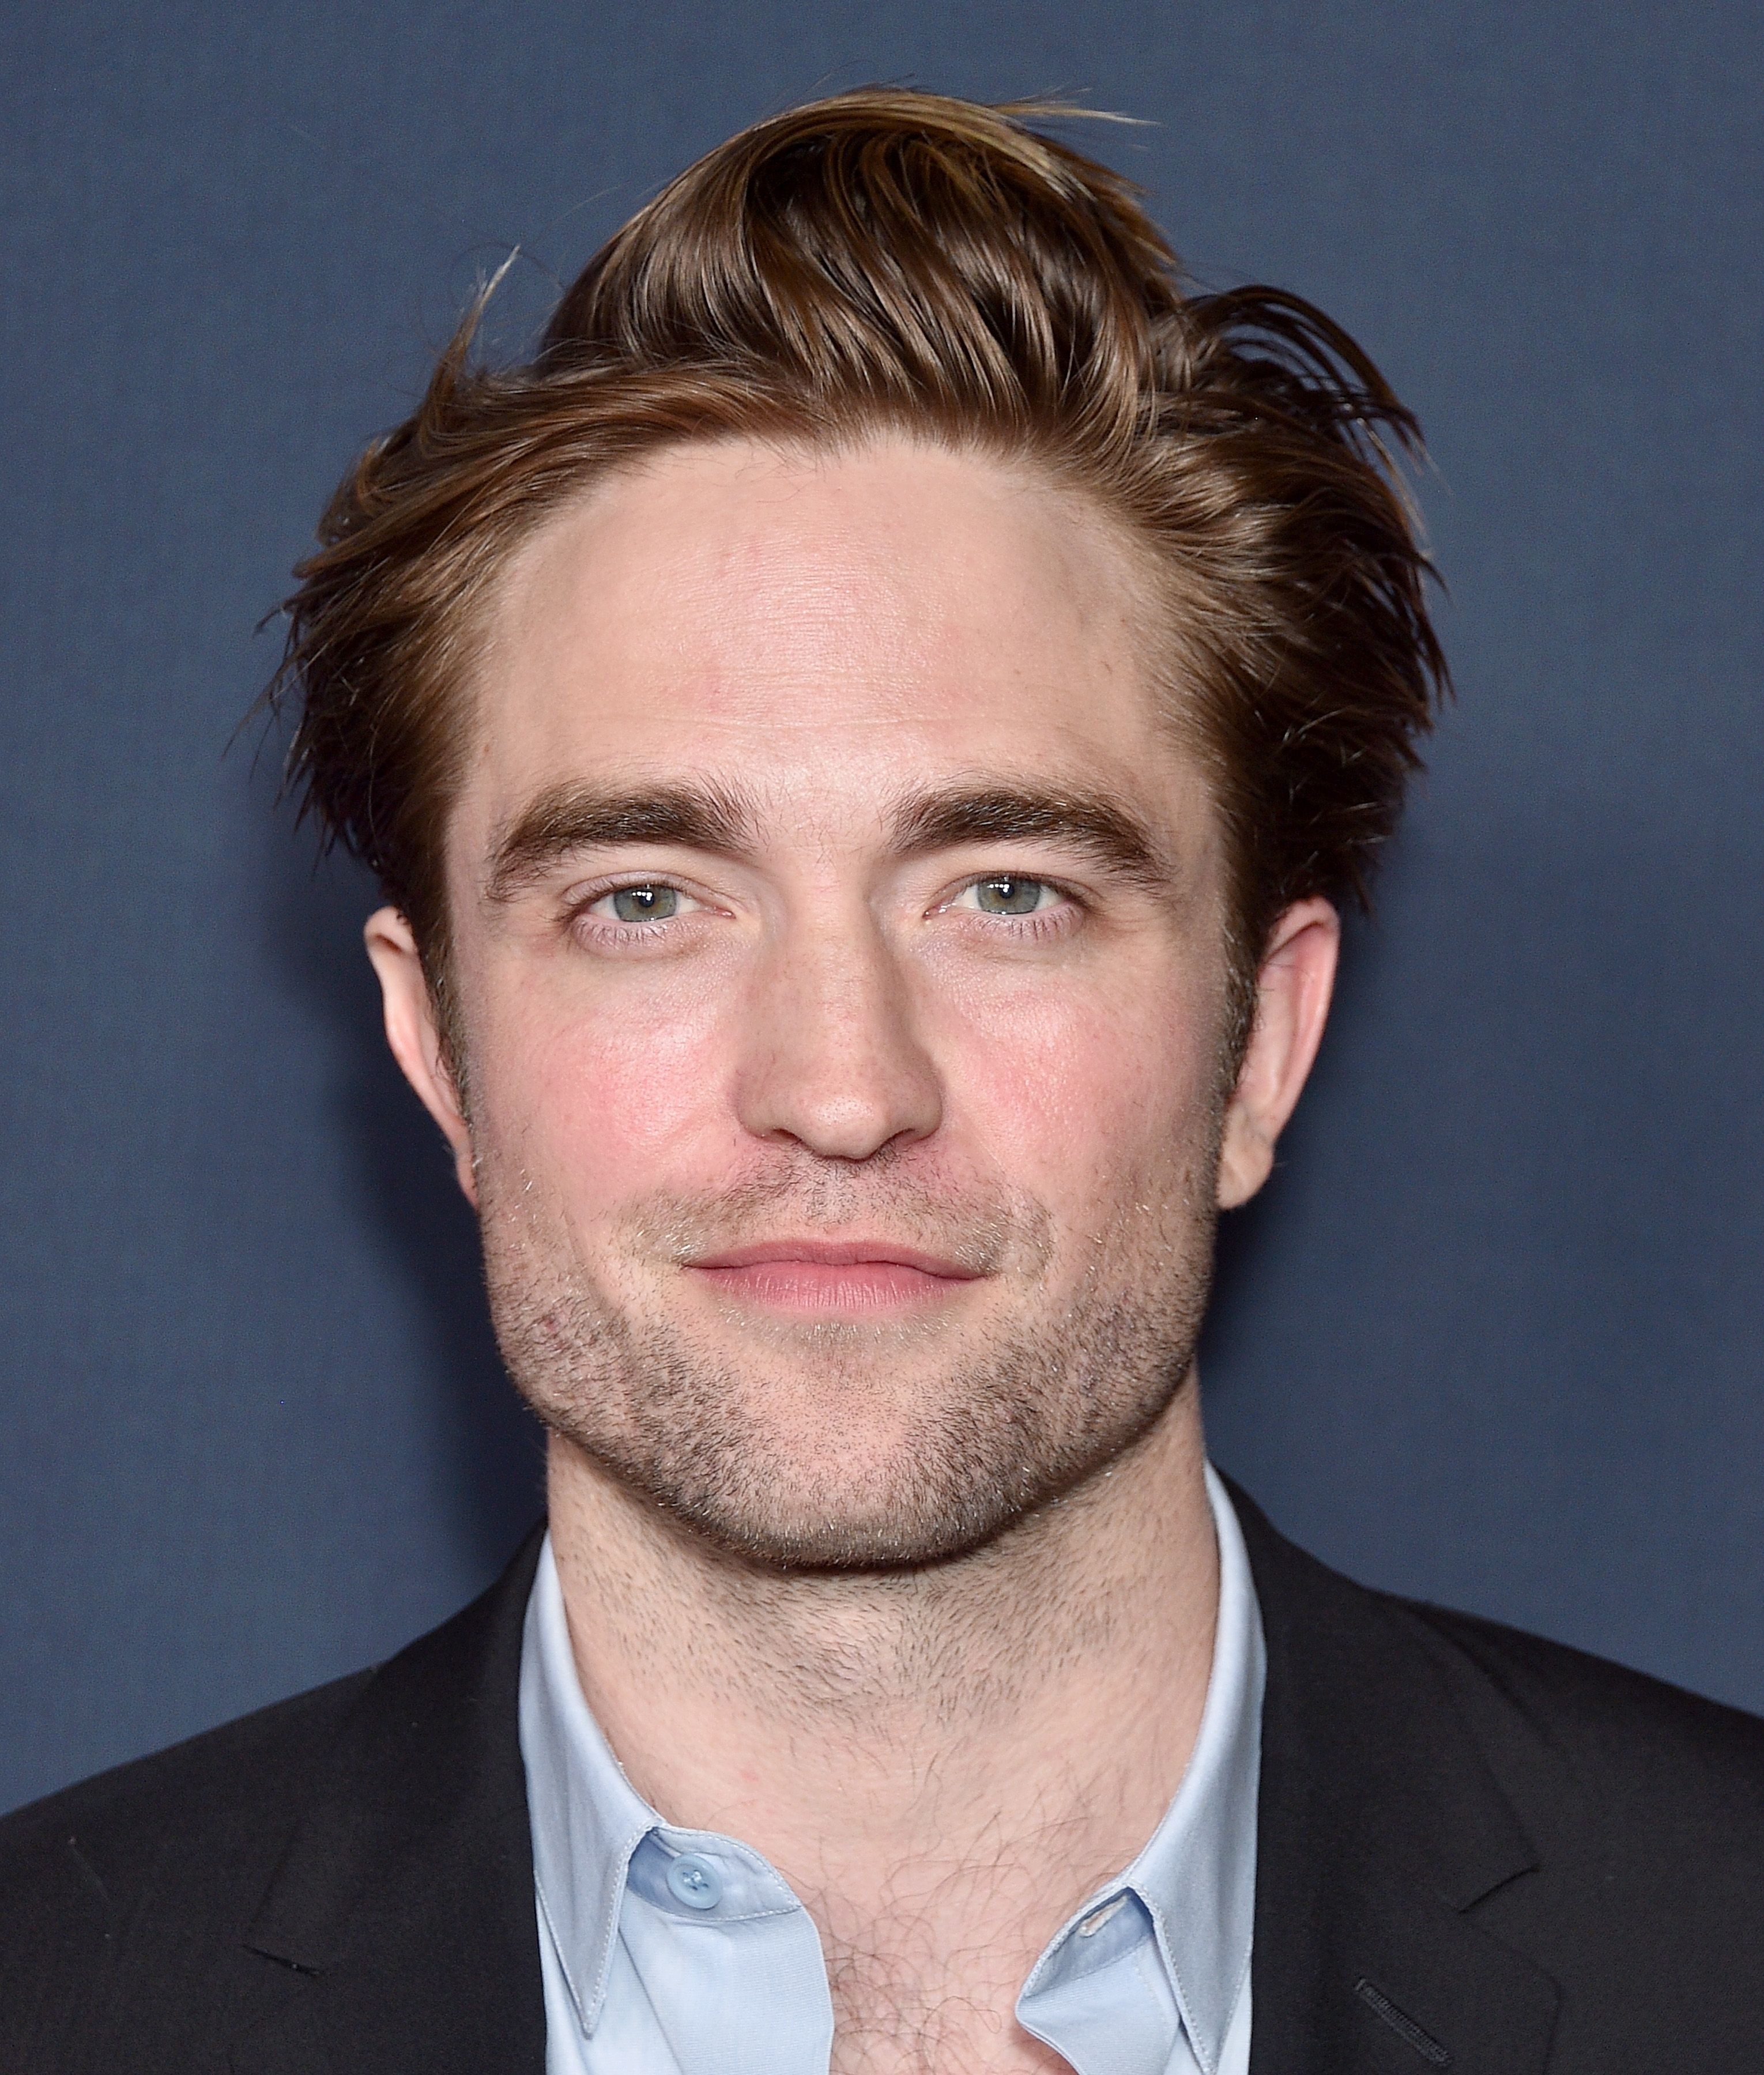 Cool, Interesting Things You Might Not Know About Robert Pattinson